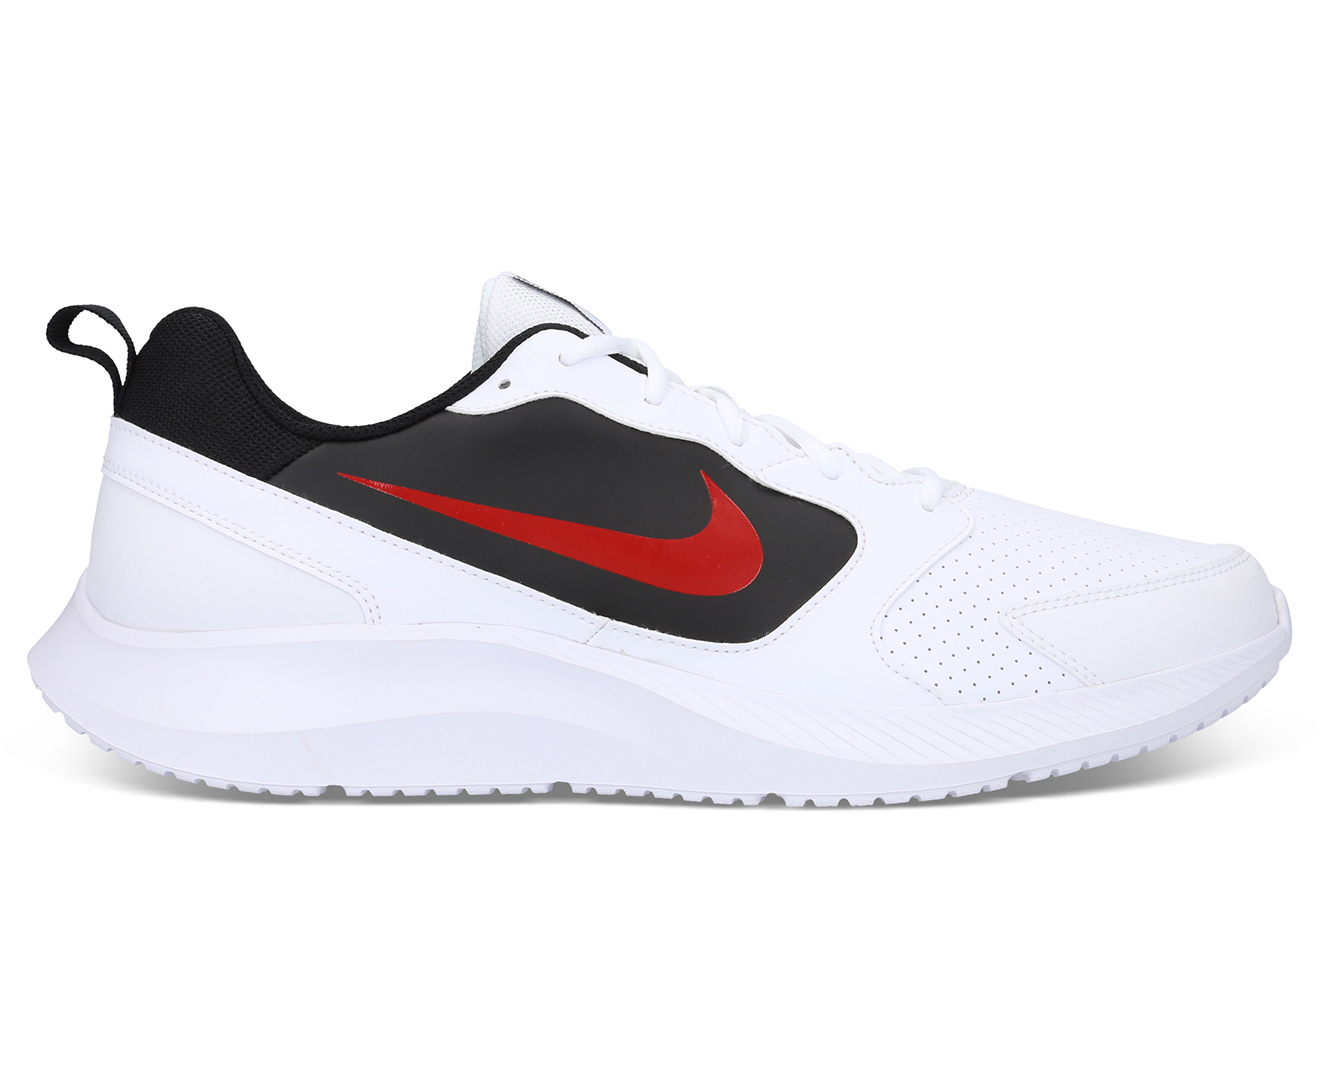 Nike Men's Todos Running Shoes - White/University Red/Black | Catch.co.nz